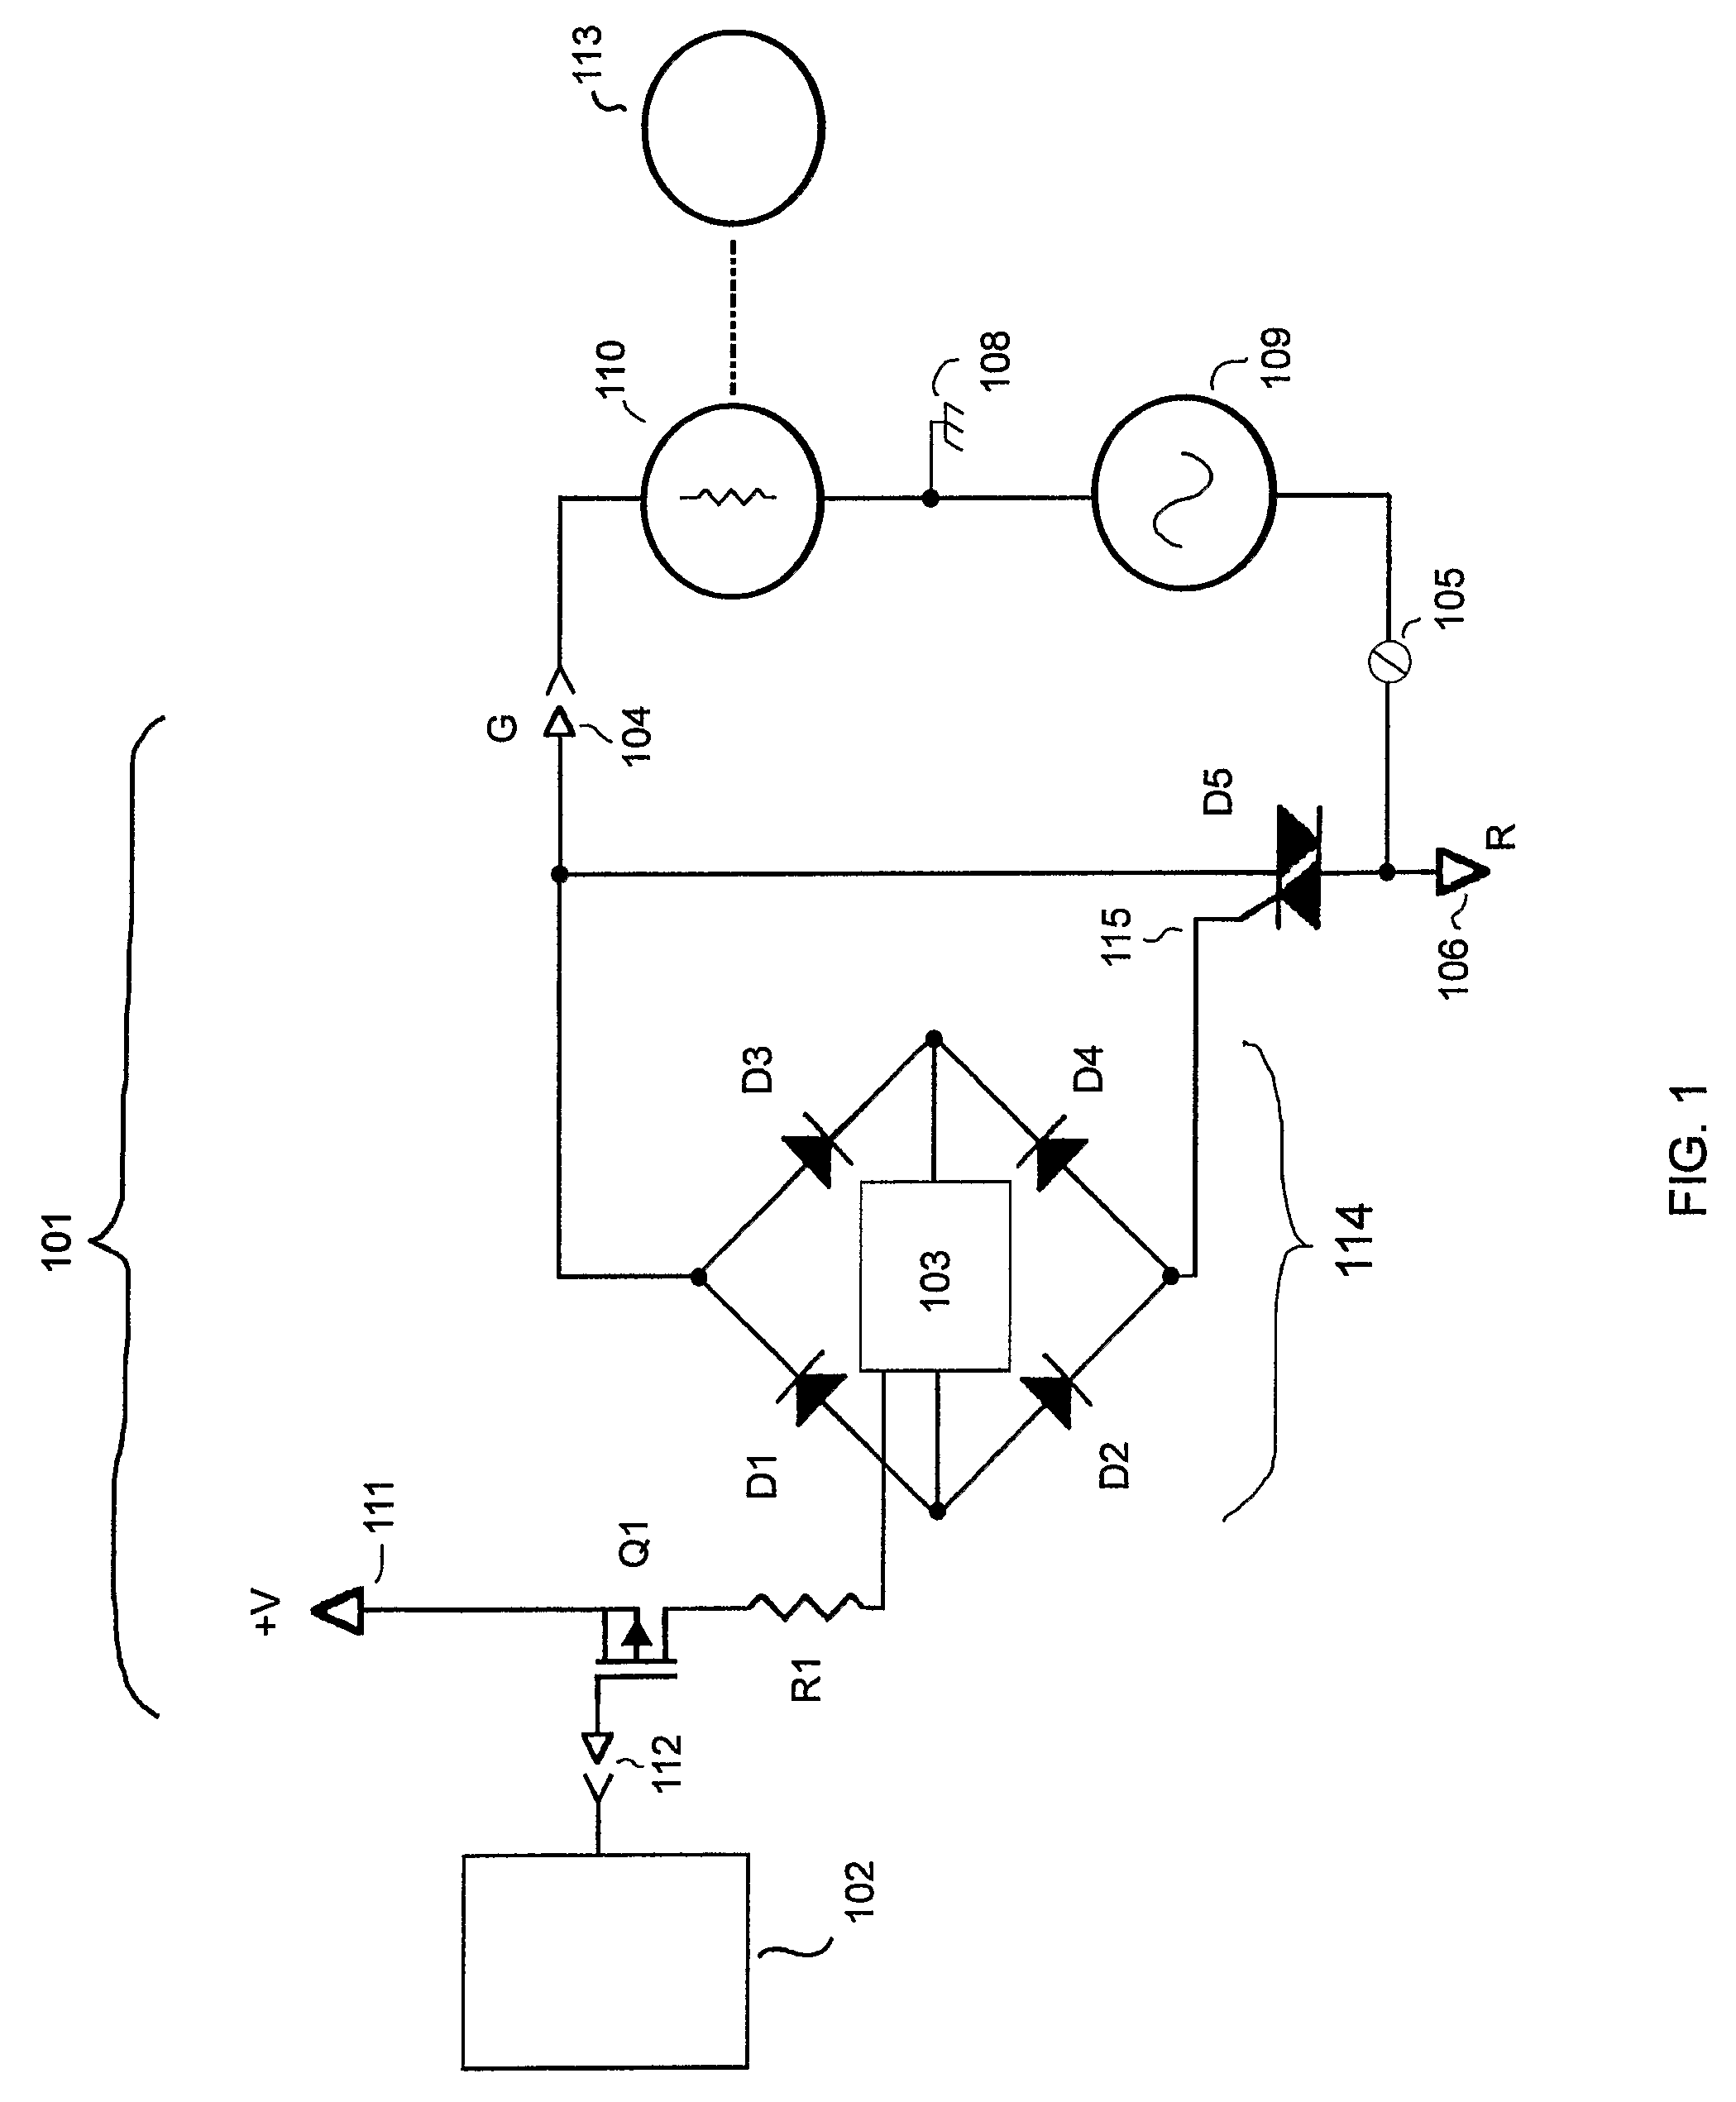 Power stealing for a thermostat using a TRIAC with FET control